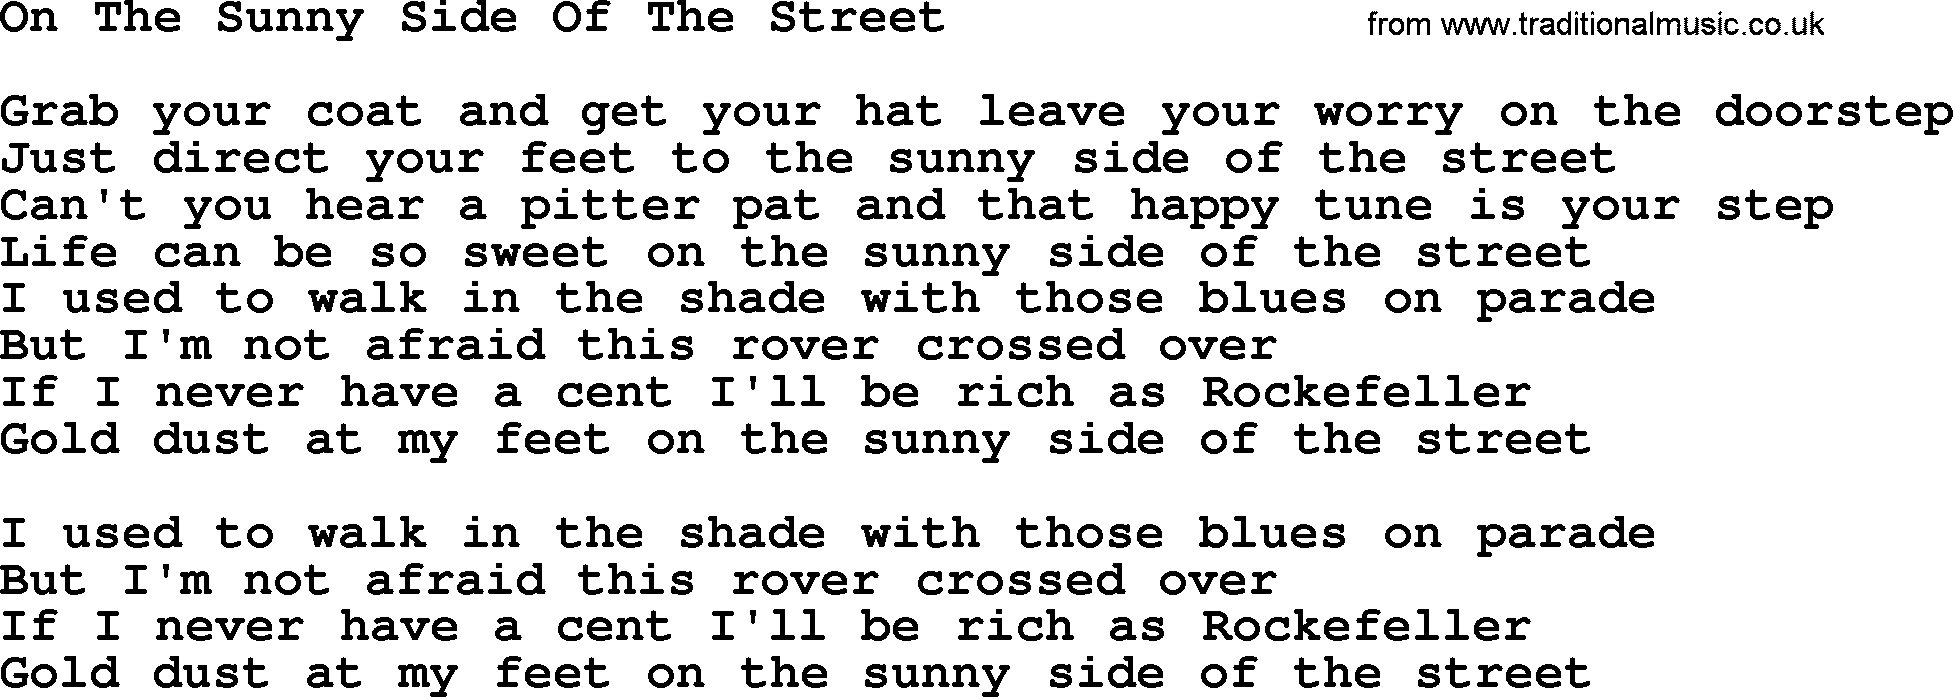 Willie Nelson song: On The Sunny Side Of The Street lyrics